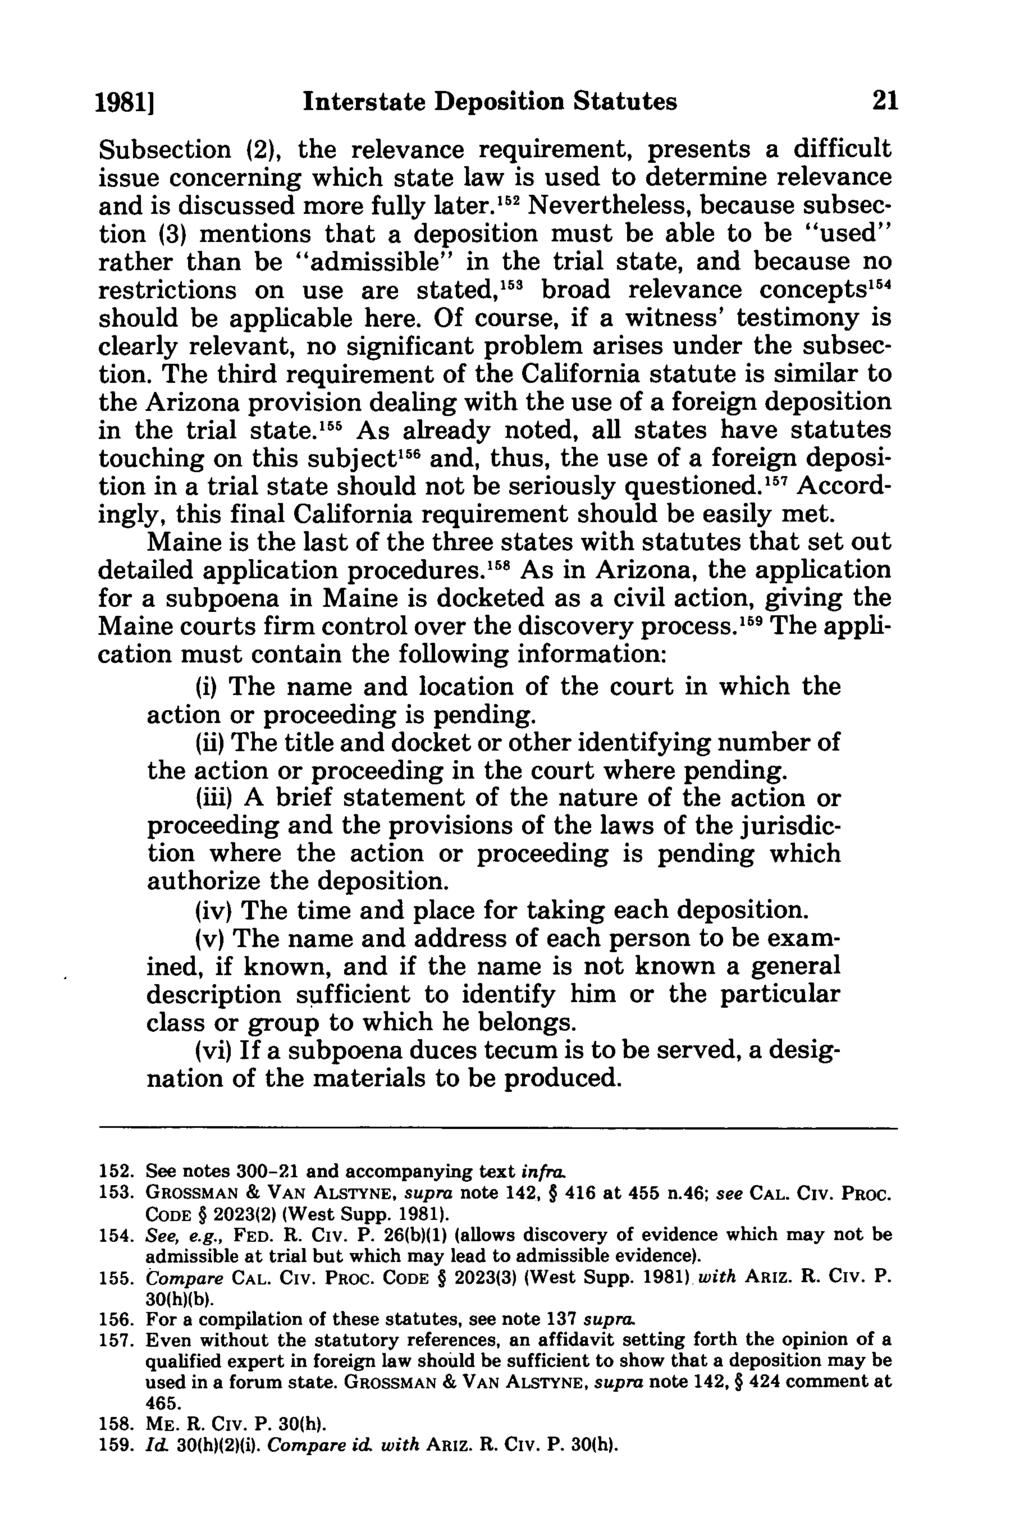 19811 Interstate Deposition Statutes Subsection (2), the relevance requirement, presents a difficult issue concerning which state law is used to determine relevance and is discussed more fully later.